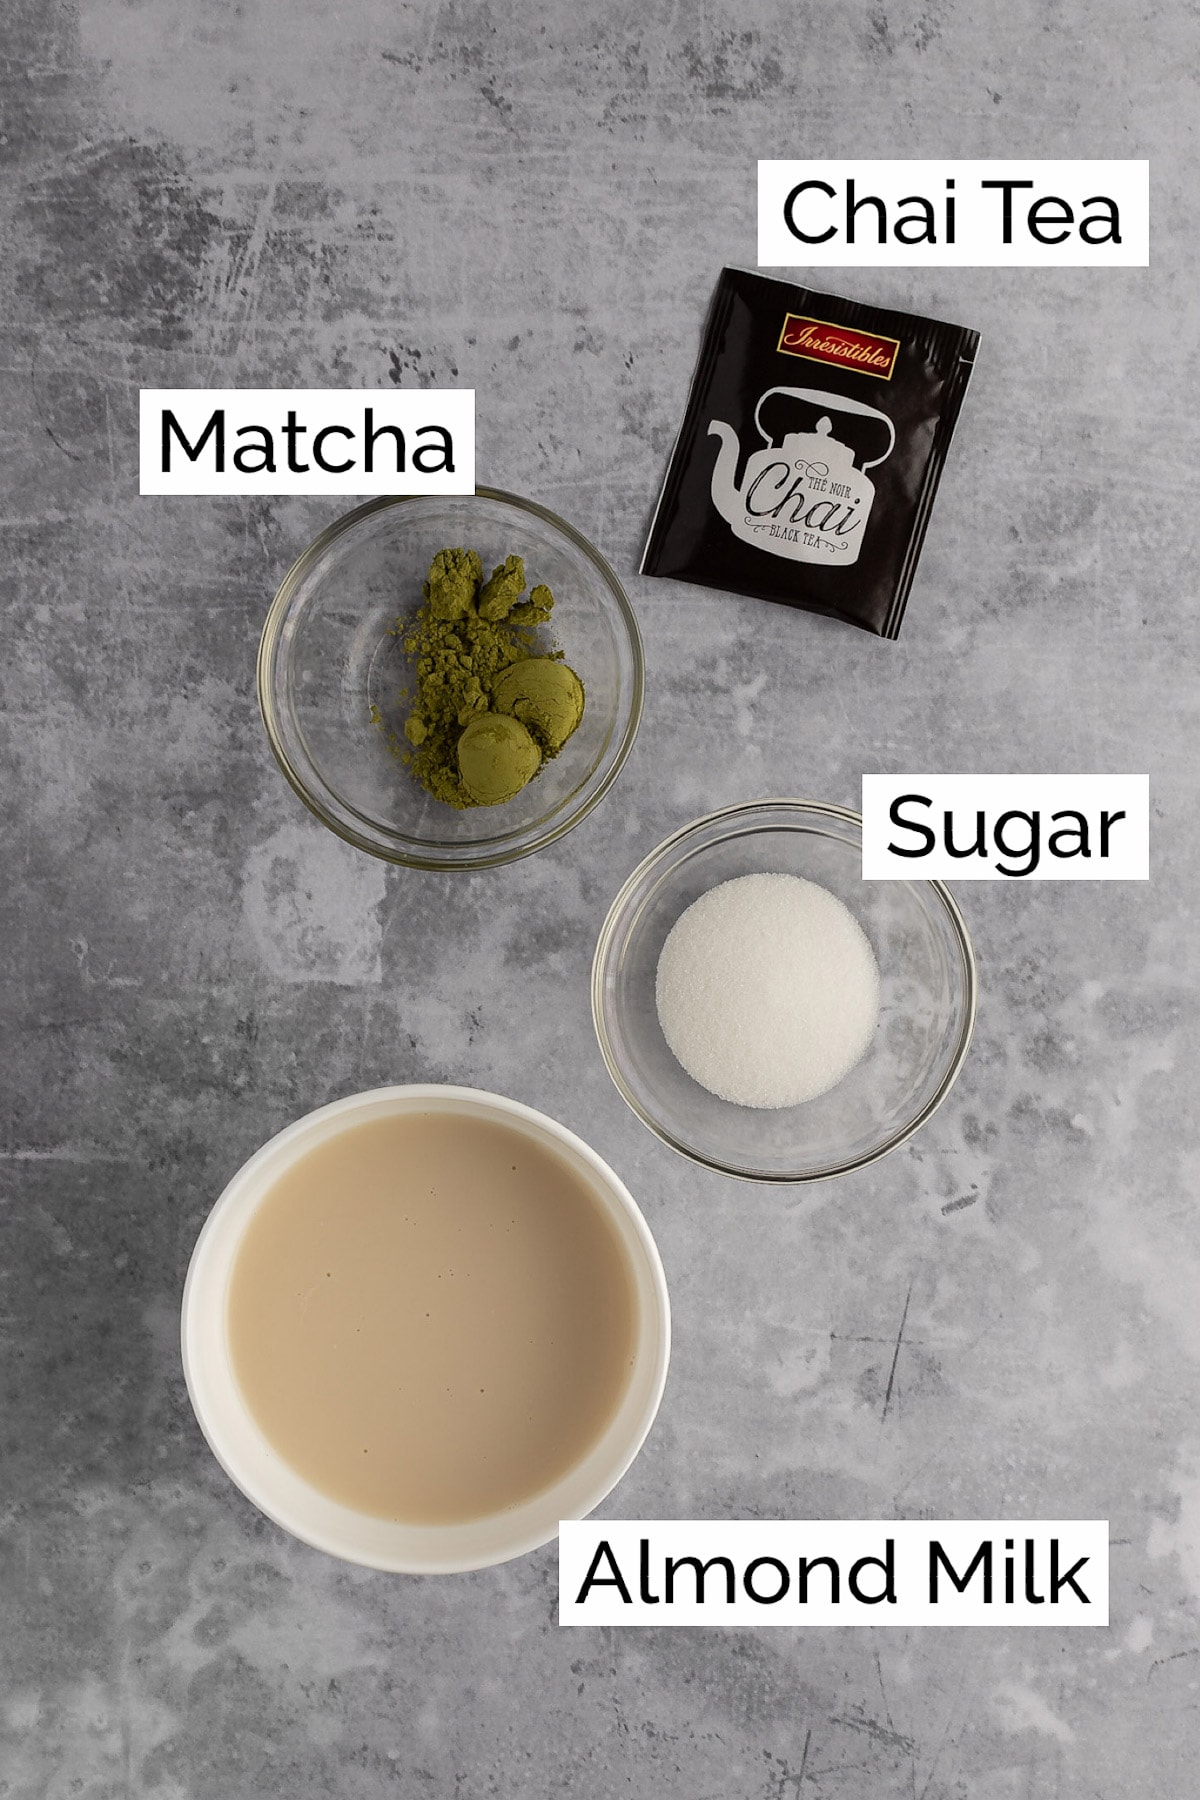 Overhead view of the ingredients needed to make the latte.